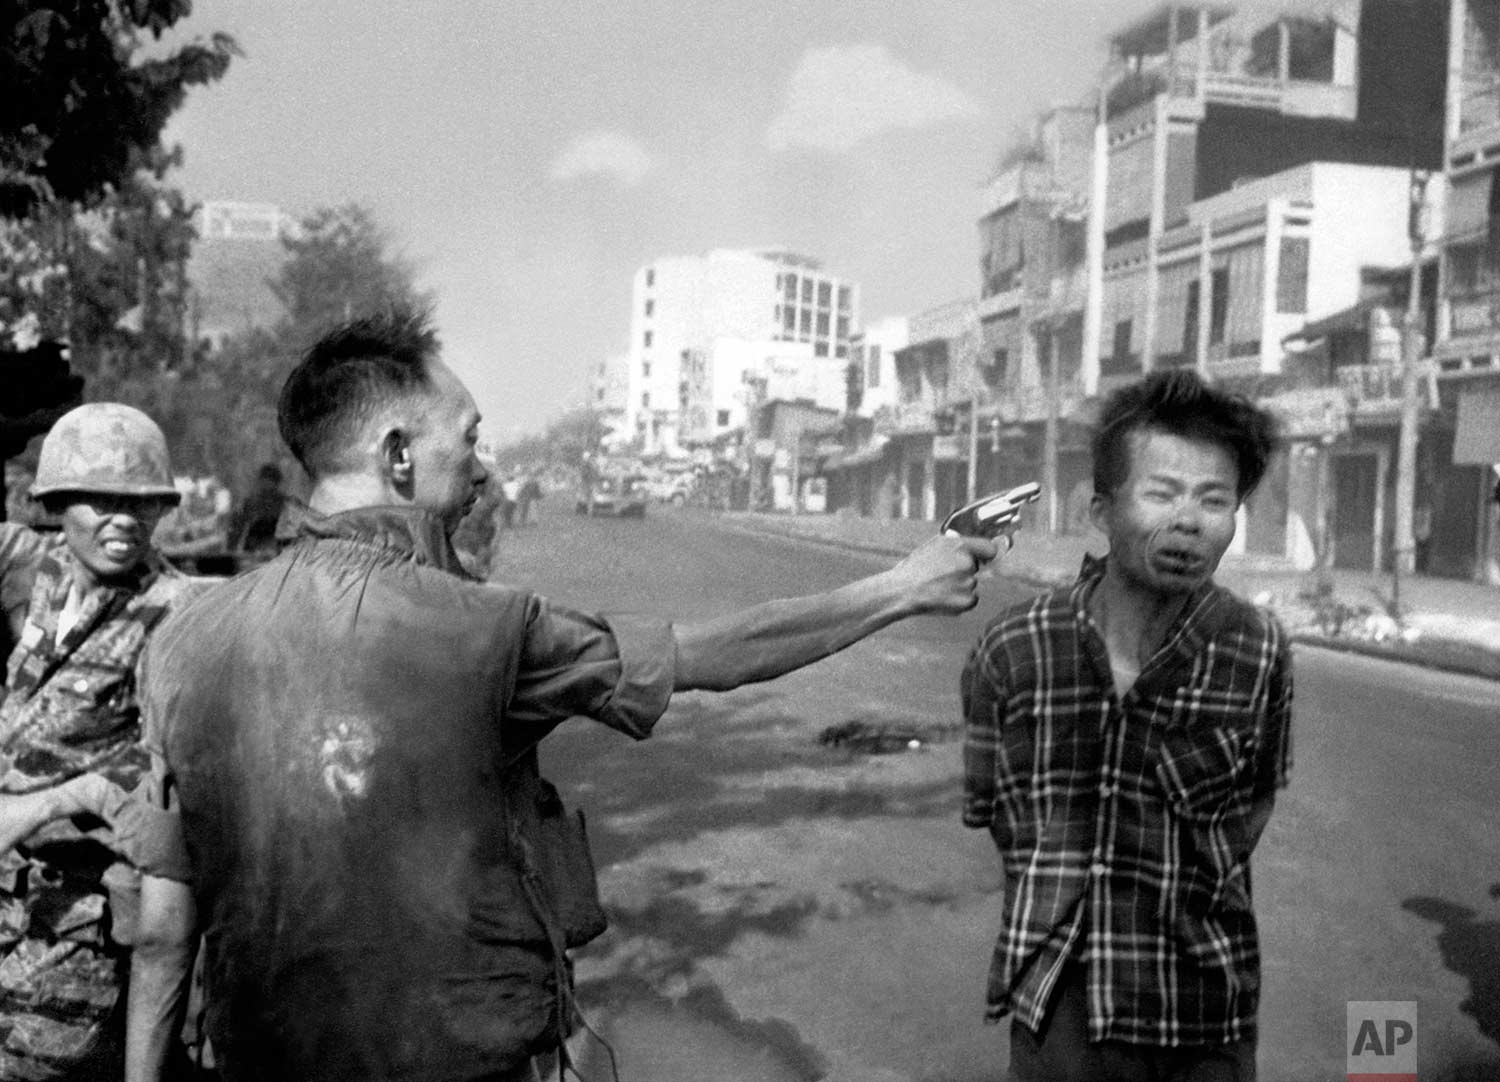  ** EDS NOTE: GRAPHIC CONTENT ** South Vietnamese Gen. Nguyen Ngoc Loan, chief of the National Police, fires his pistol into the head of suspected Viet Cong officer Nguyen Van Lem (also known as Bay Lop) on a Saigon street Feb. 1, 1968, early in the 